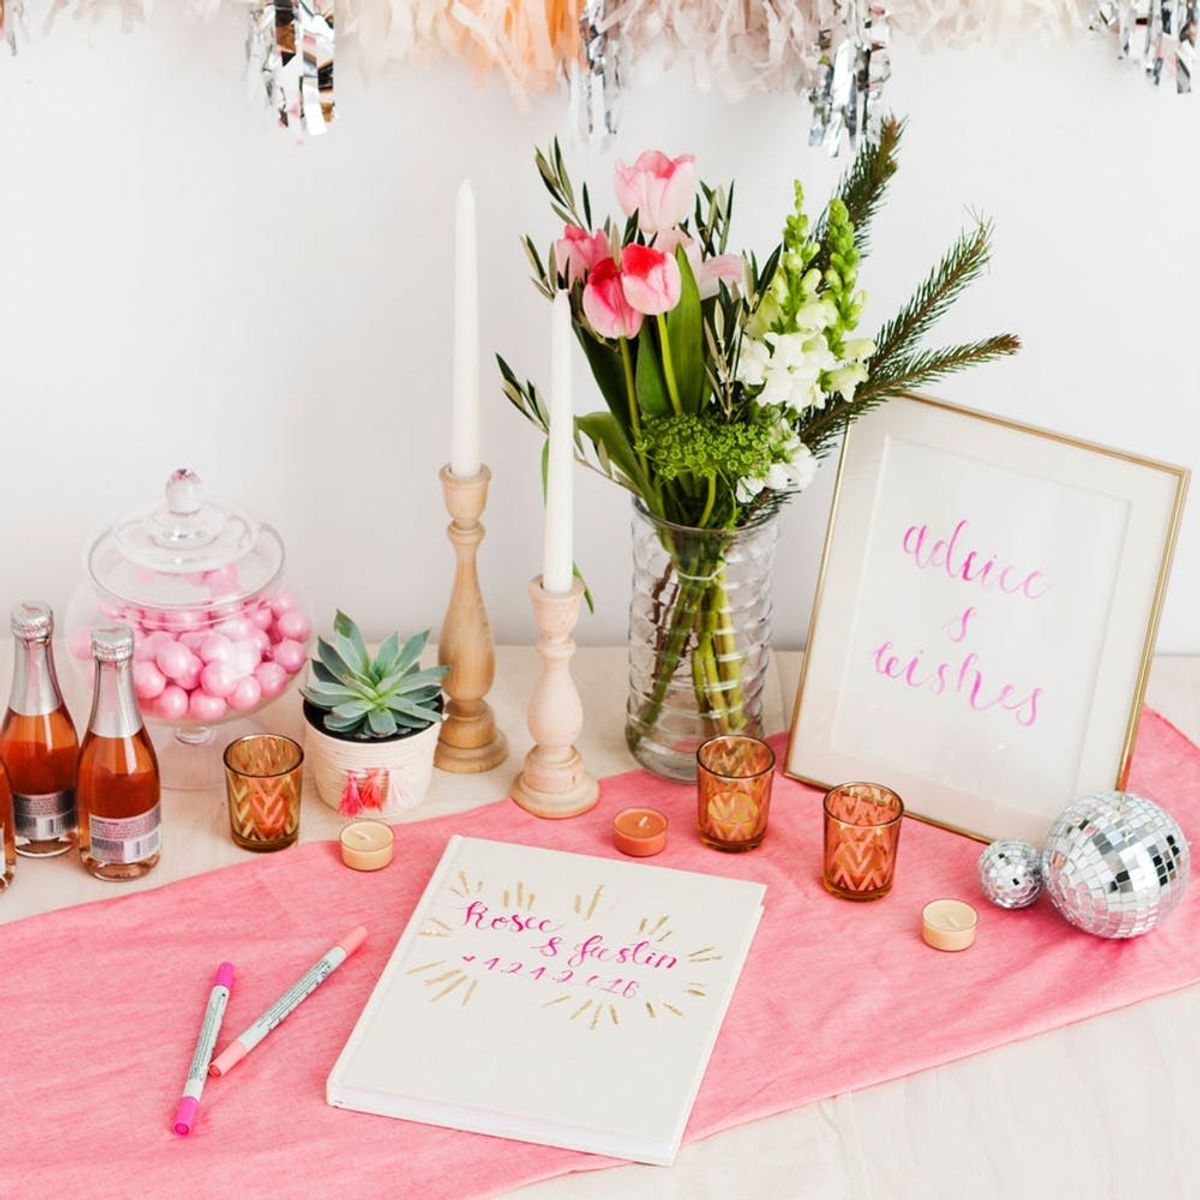 Add This Simple Project to Your List of Wedding DIYs